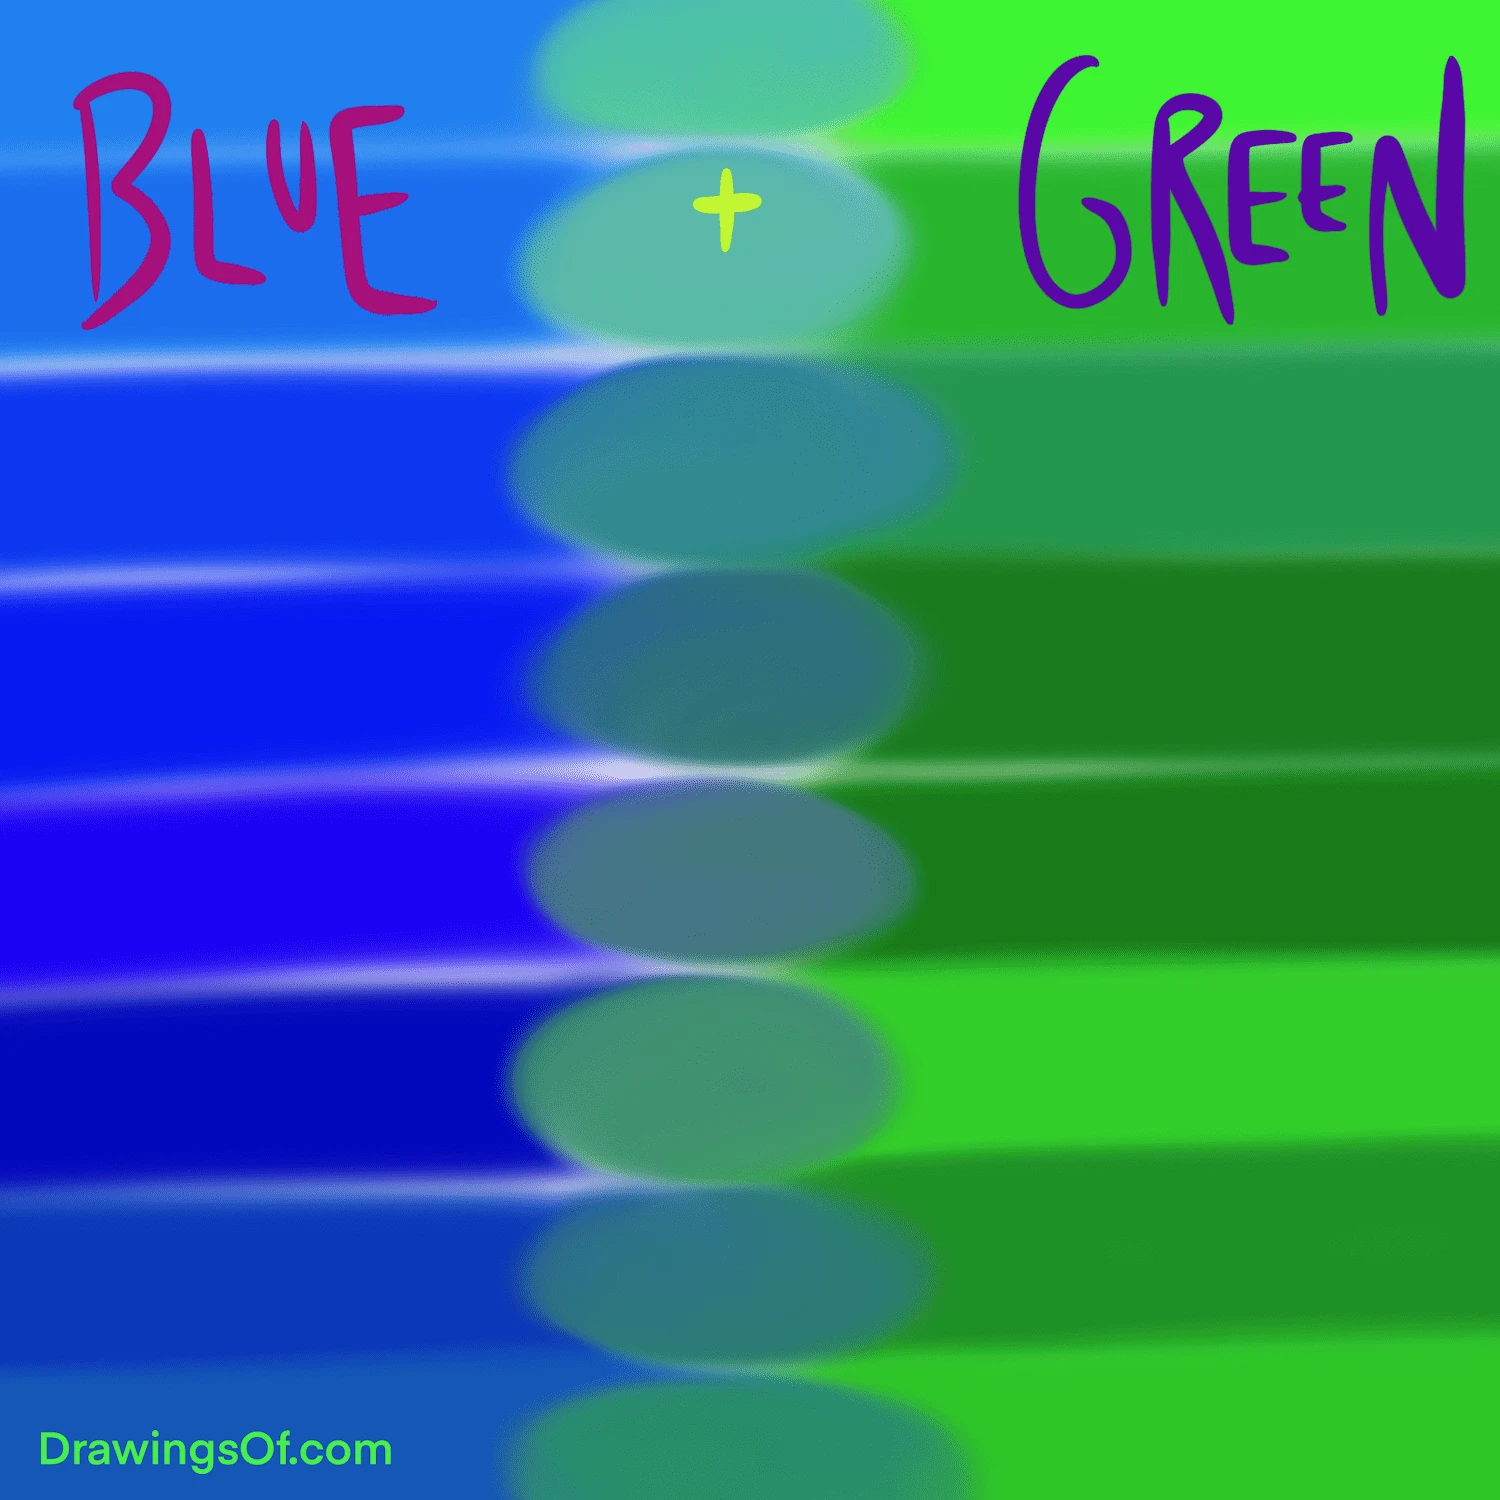 What Color Does Green and Blue Make?